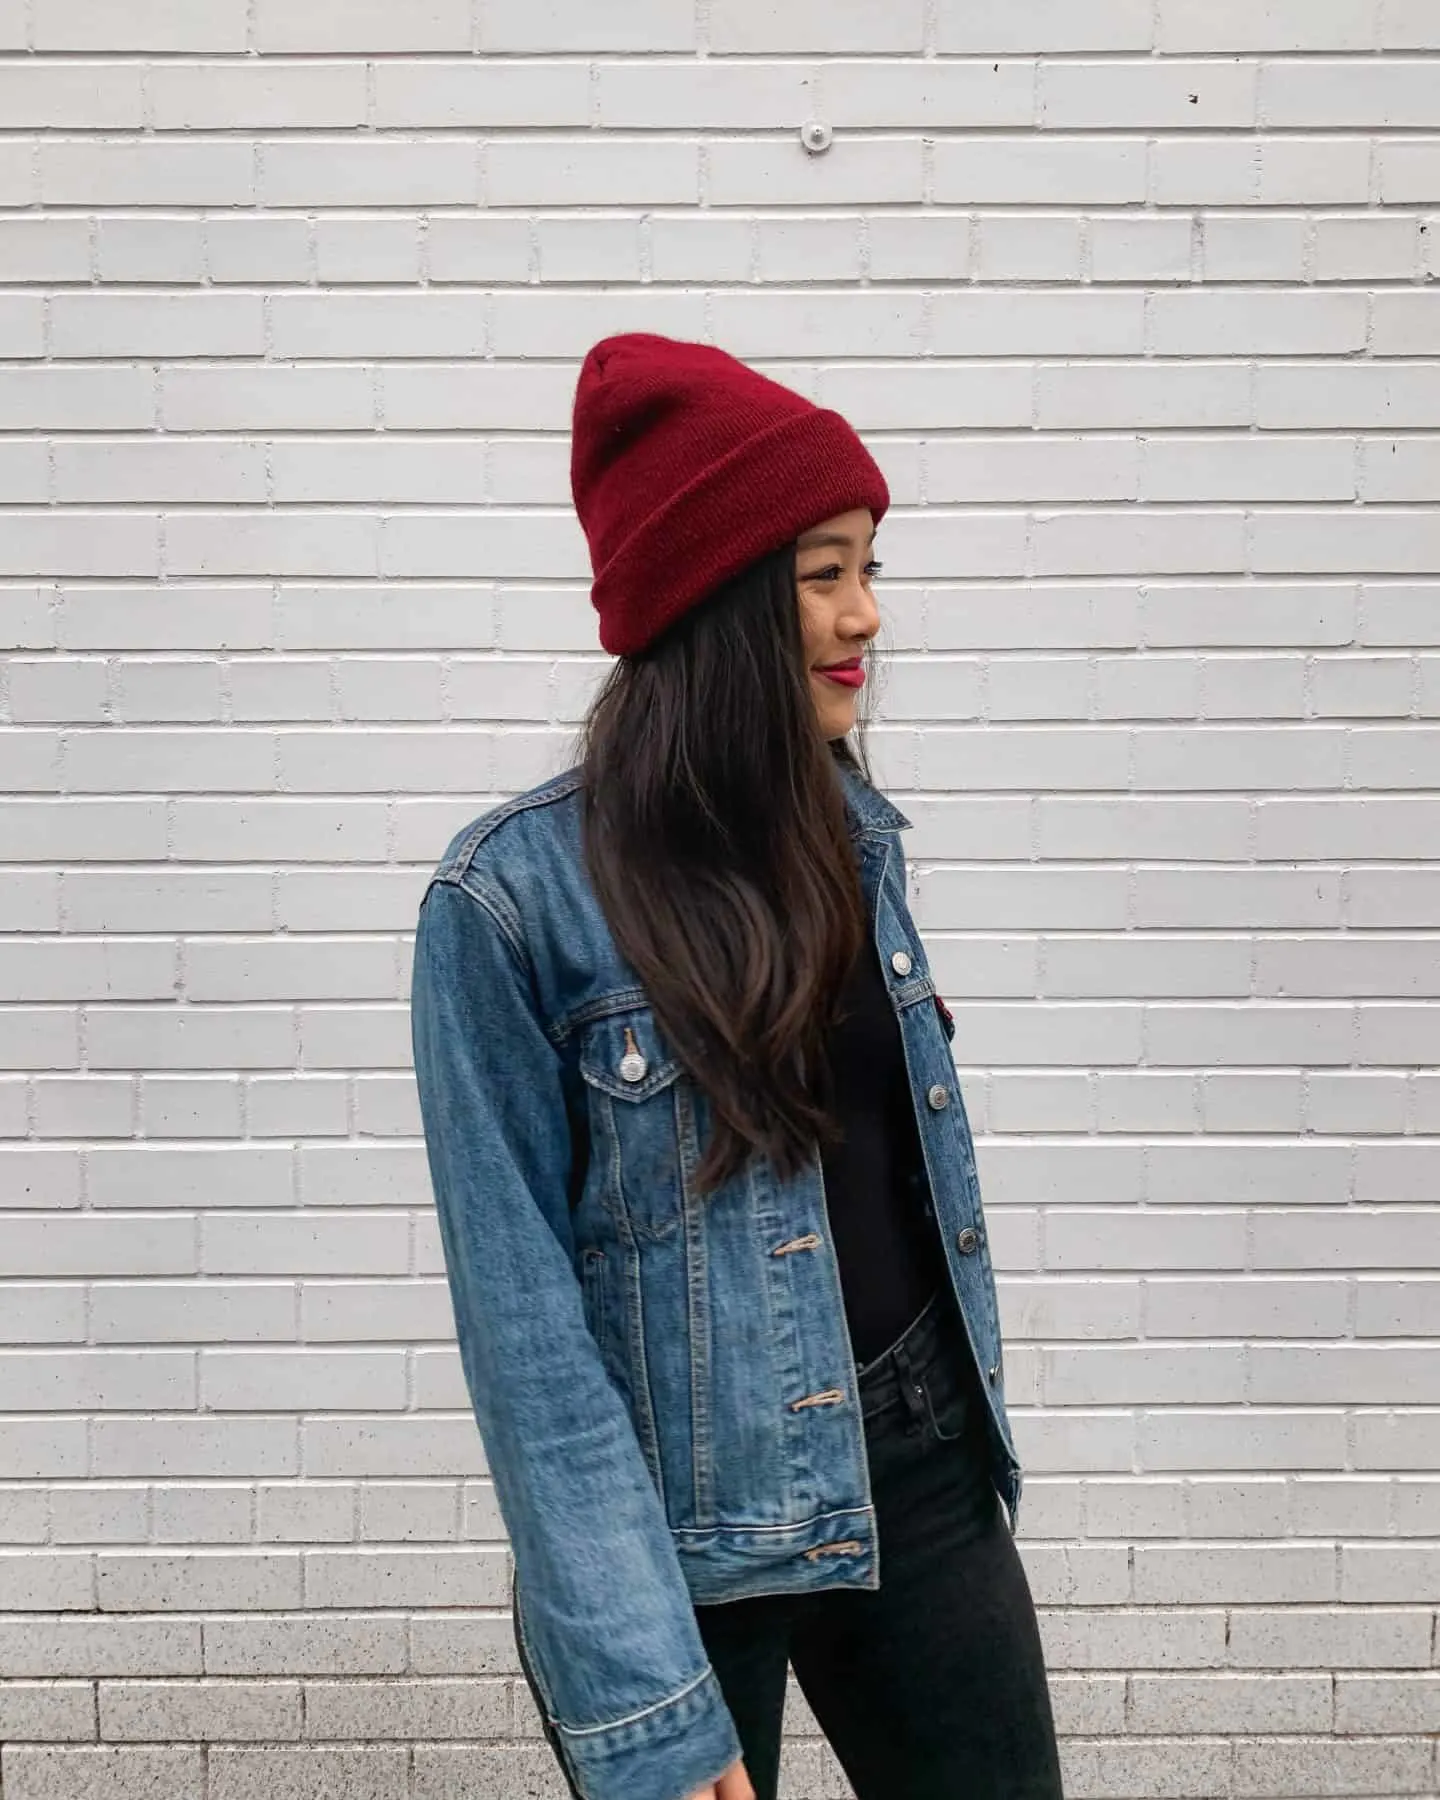 Amazon Fashion outfit - American Apparel beanie and Levi's trucker jacket